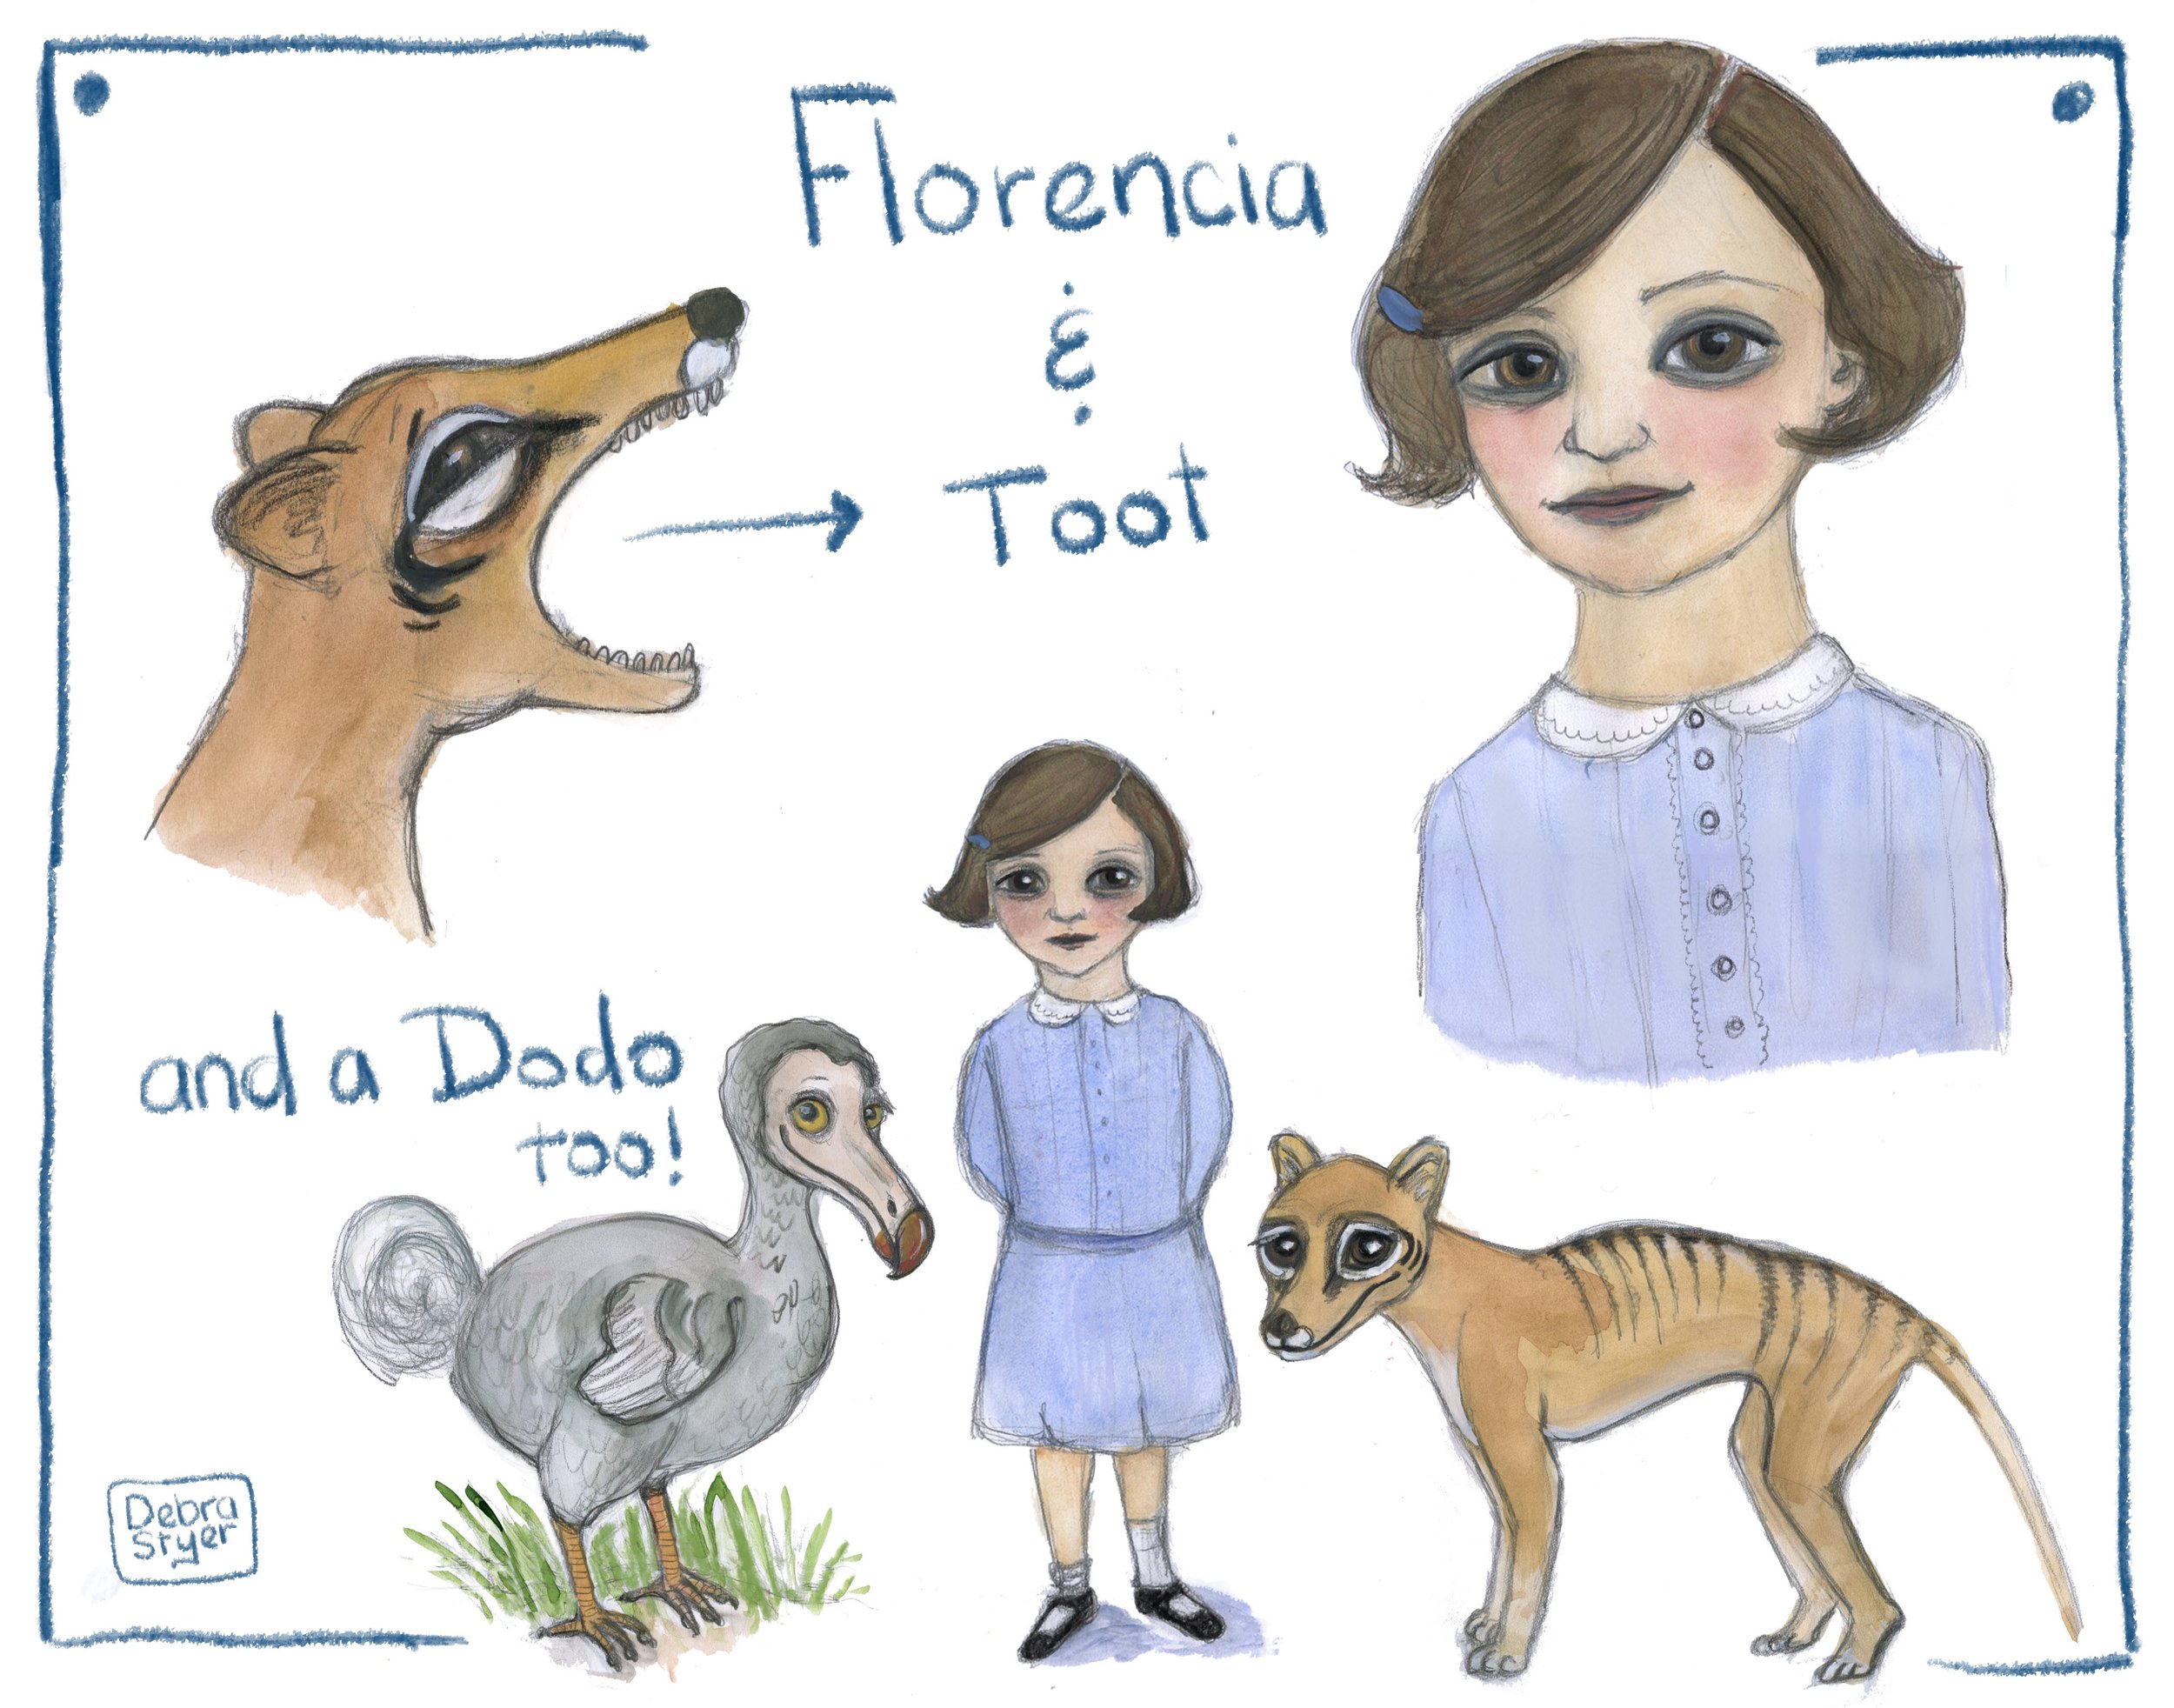 Florencia, Toot and the Dodo character portraits #MATS.jpg